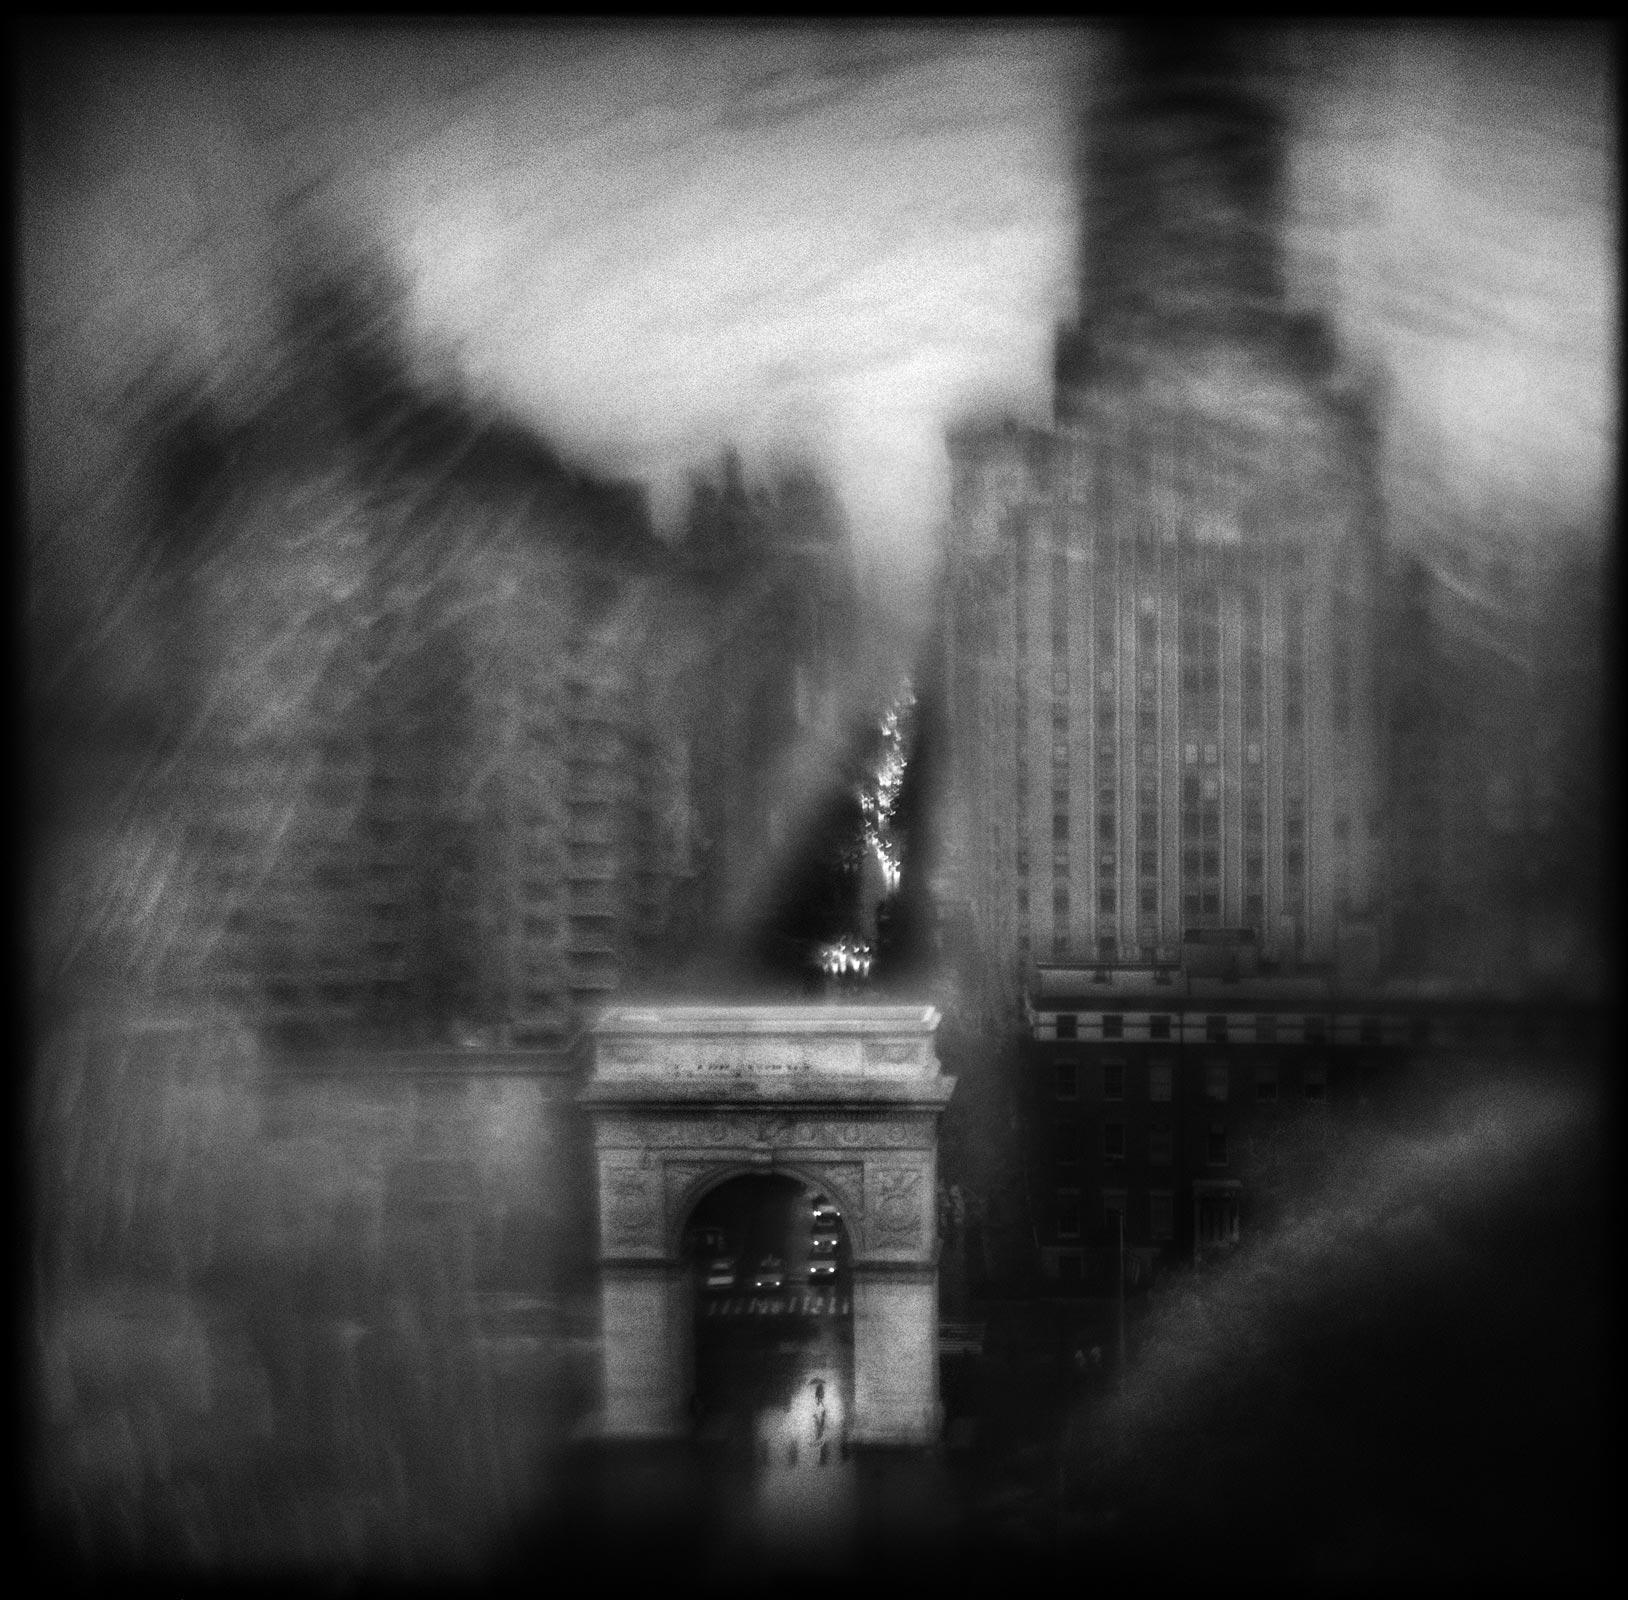 Susan Burnstine, The Last Goodbye, 2010, (Central Park, New York City), archival pigment ink print. Susan Burnstine portrays her dream-like visions entirely in-camera, rather than with post-processing manipulations. To achieve this, she created